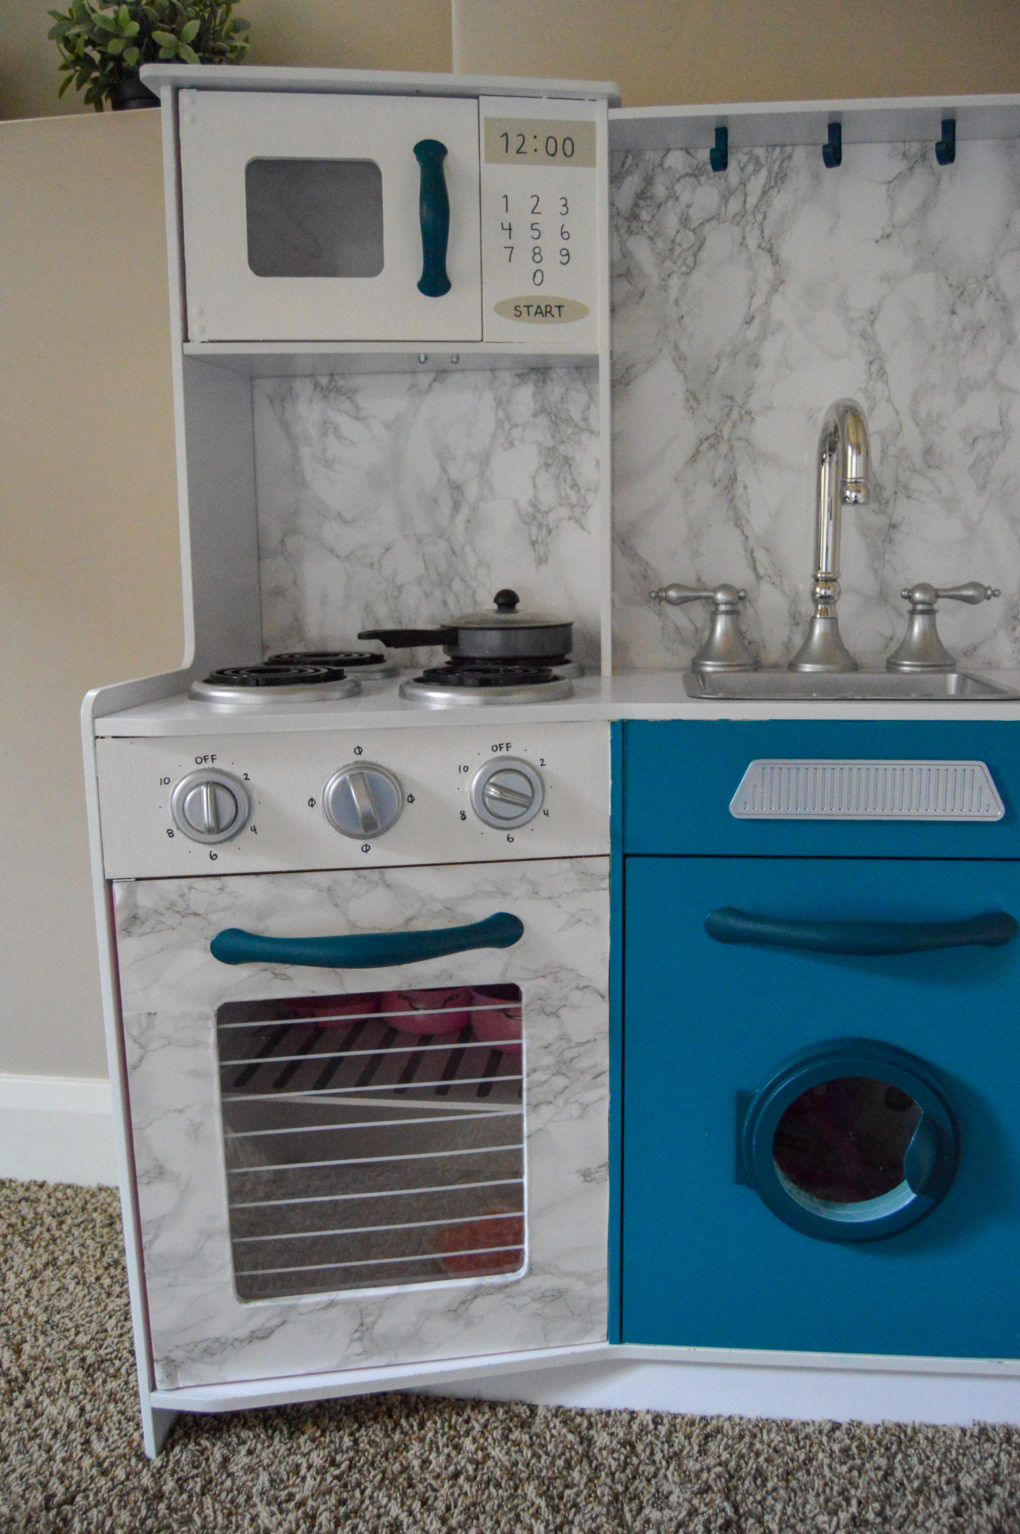 How to do a play kitchen makeover. Paint, wallpaper, and revive an old play kitchen to make it look cute and modern. Marble and wood wallpaper, teal paint, and white paint. Plus our kids' playroom nursery reveal.